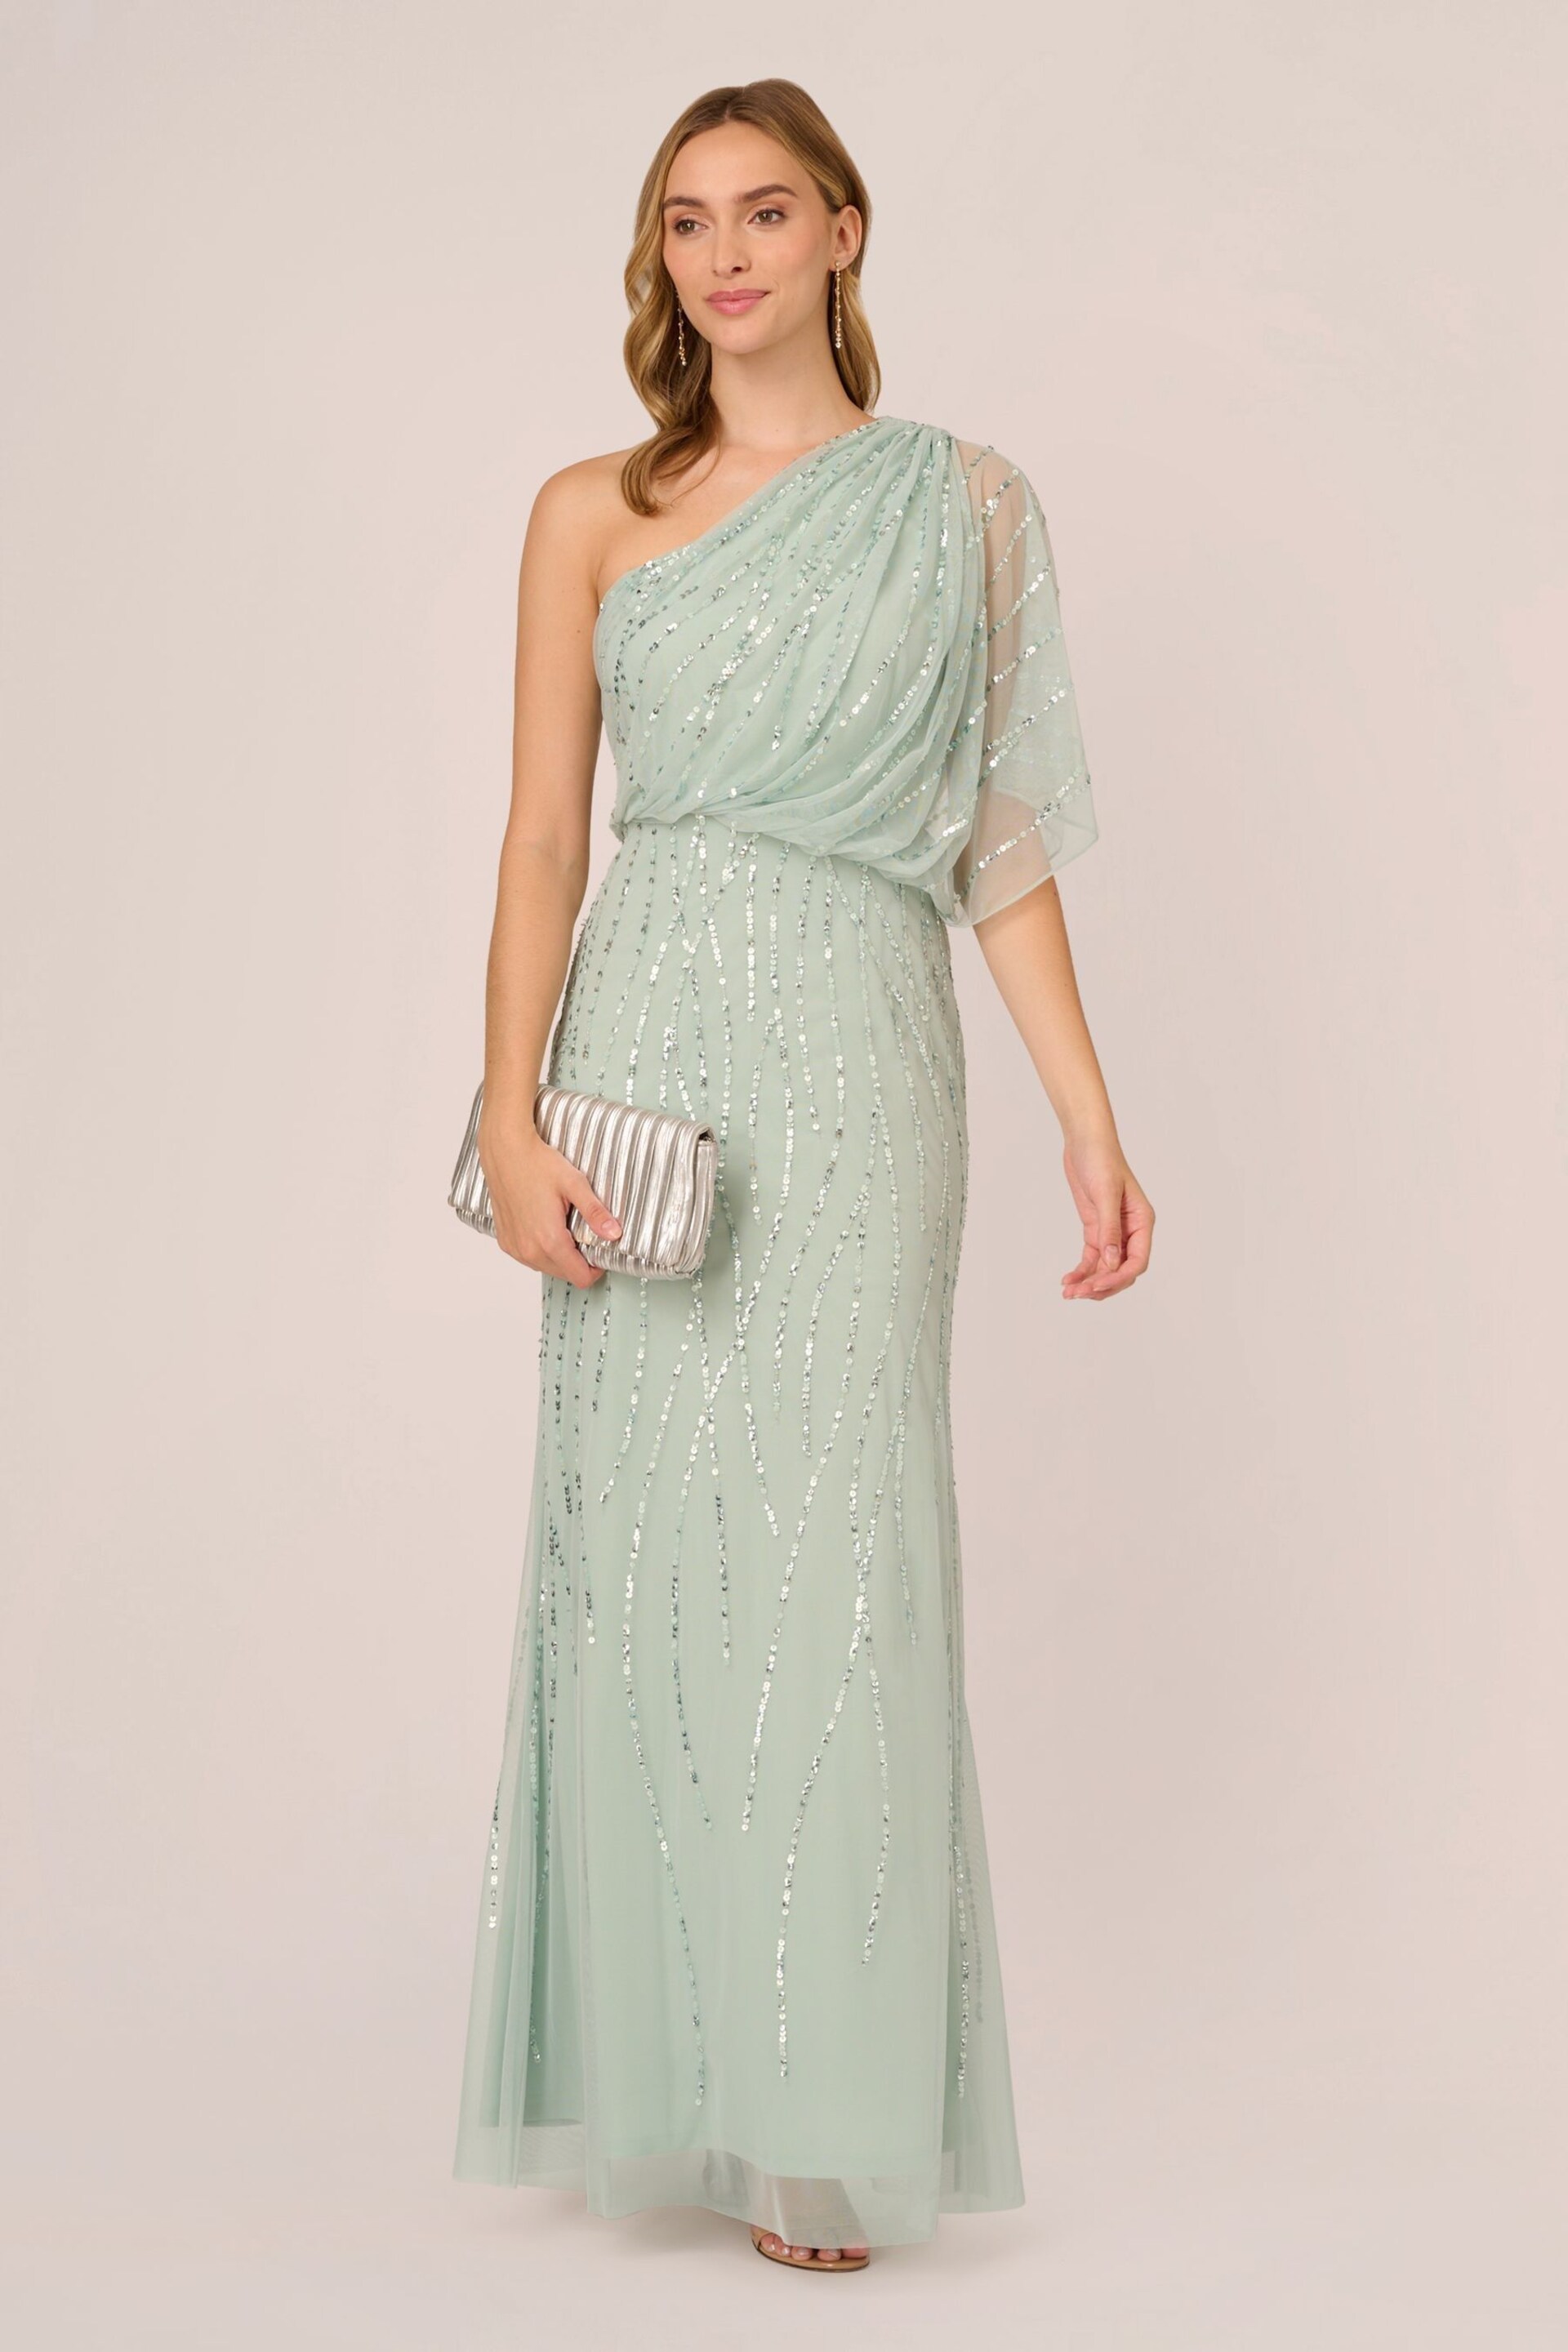 Adrianna Papell Green Long Beaded Dress - Image 3 of 7